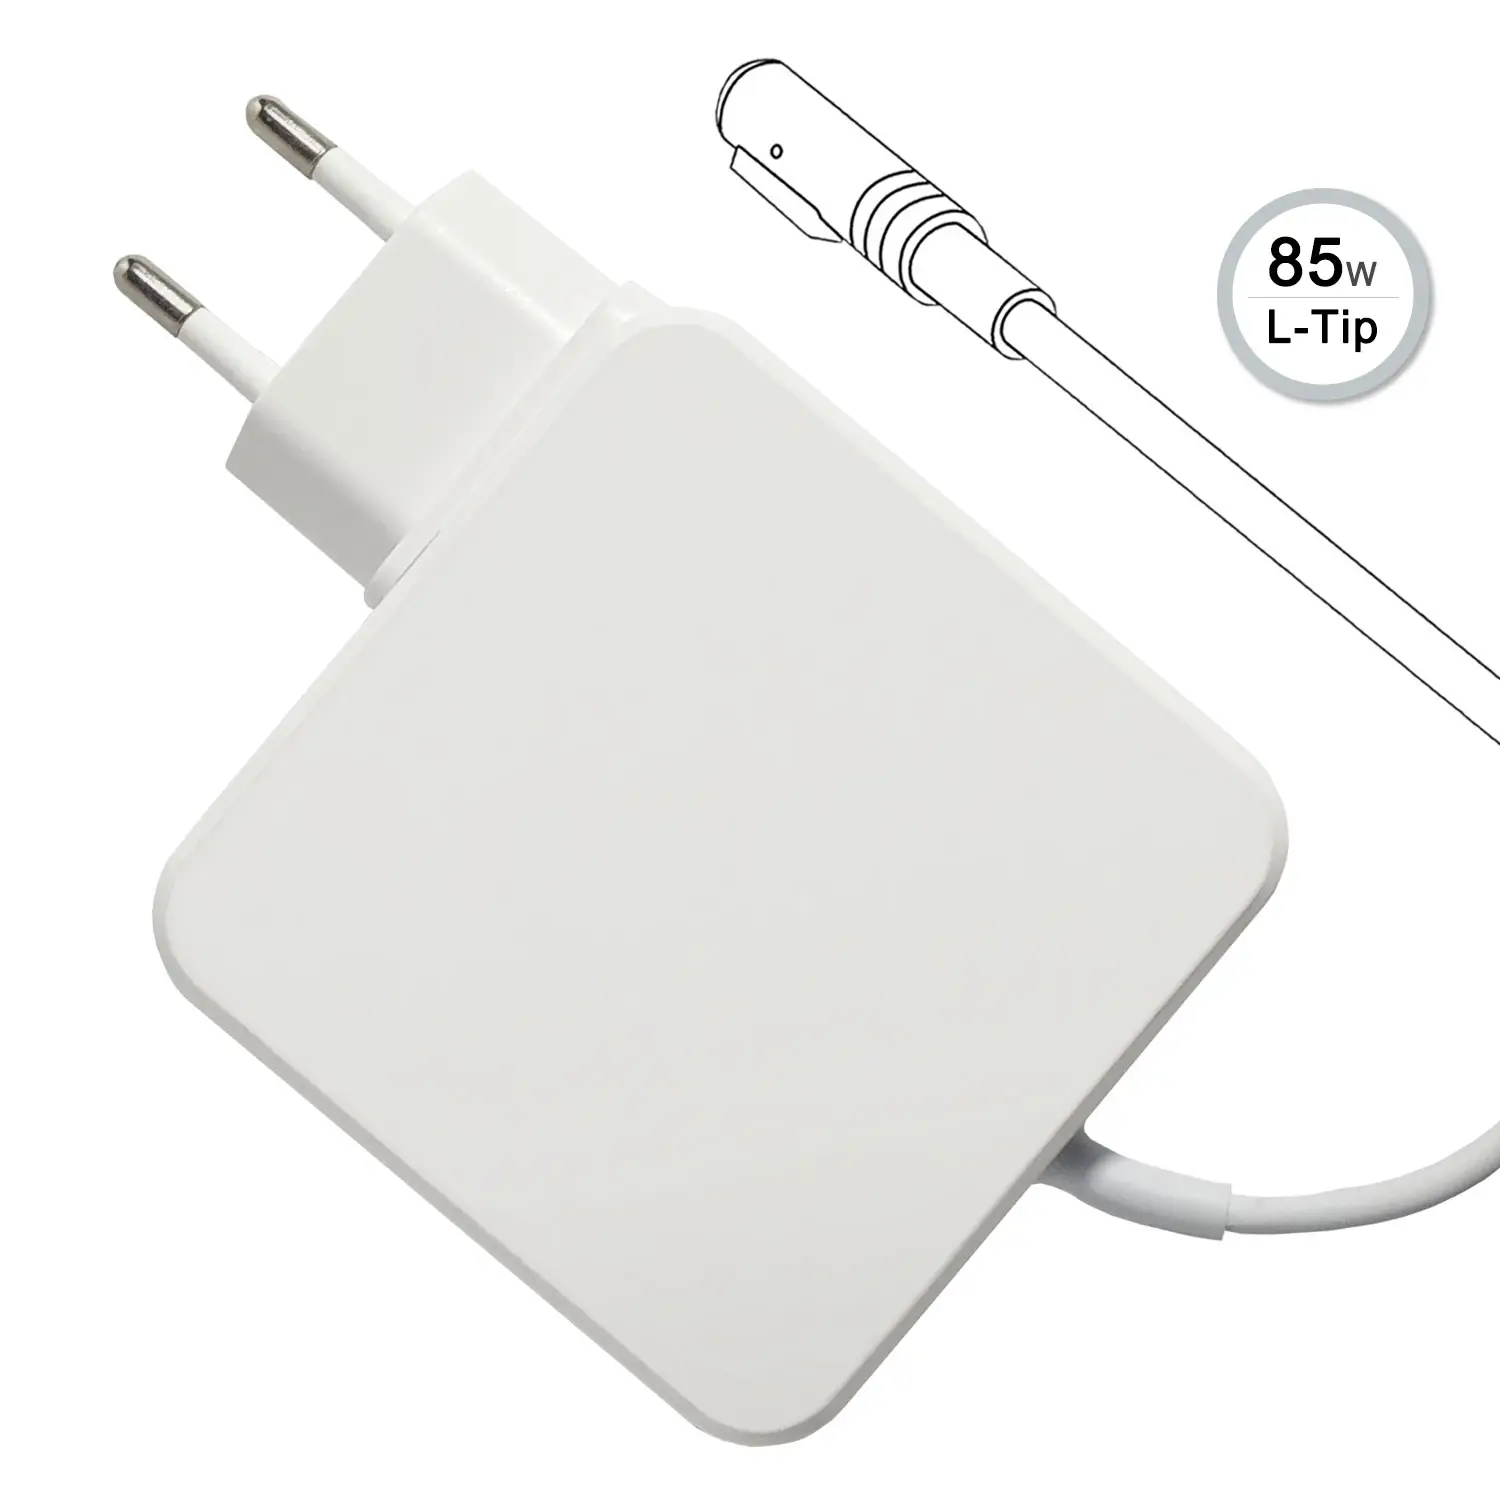 Amazon EU Plug 85W Adapter Laptop Charger for Apple Macbook pro 13 15 17 inch Charger L tip (Before Mid 2012 Models)